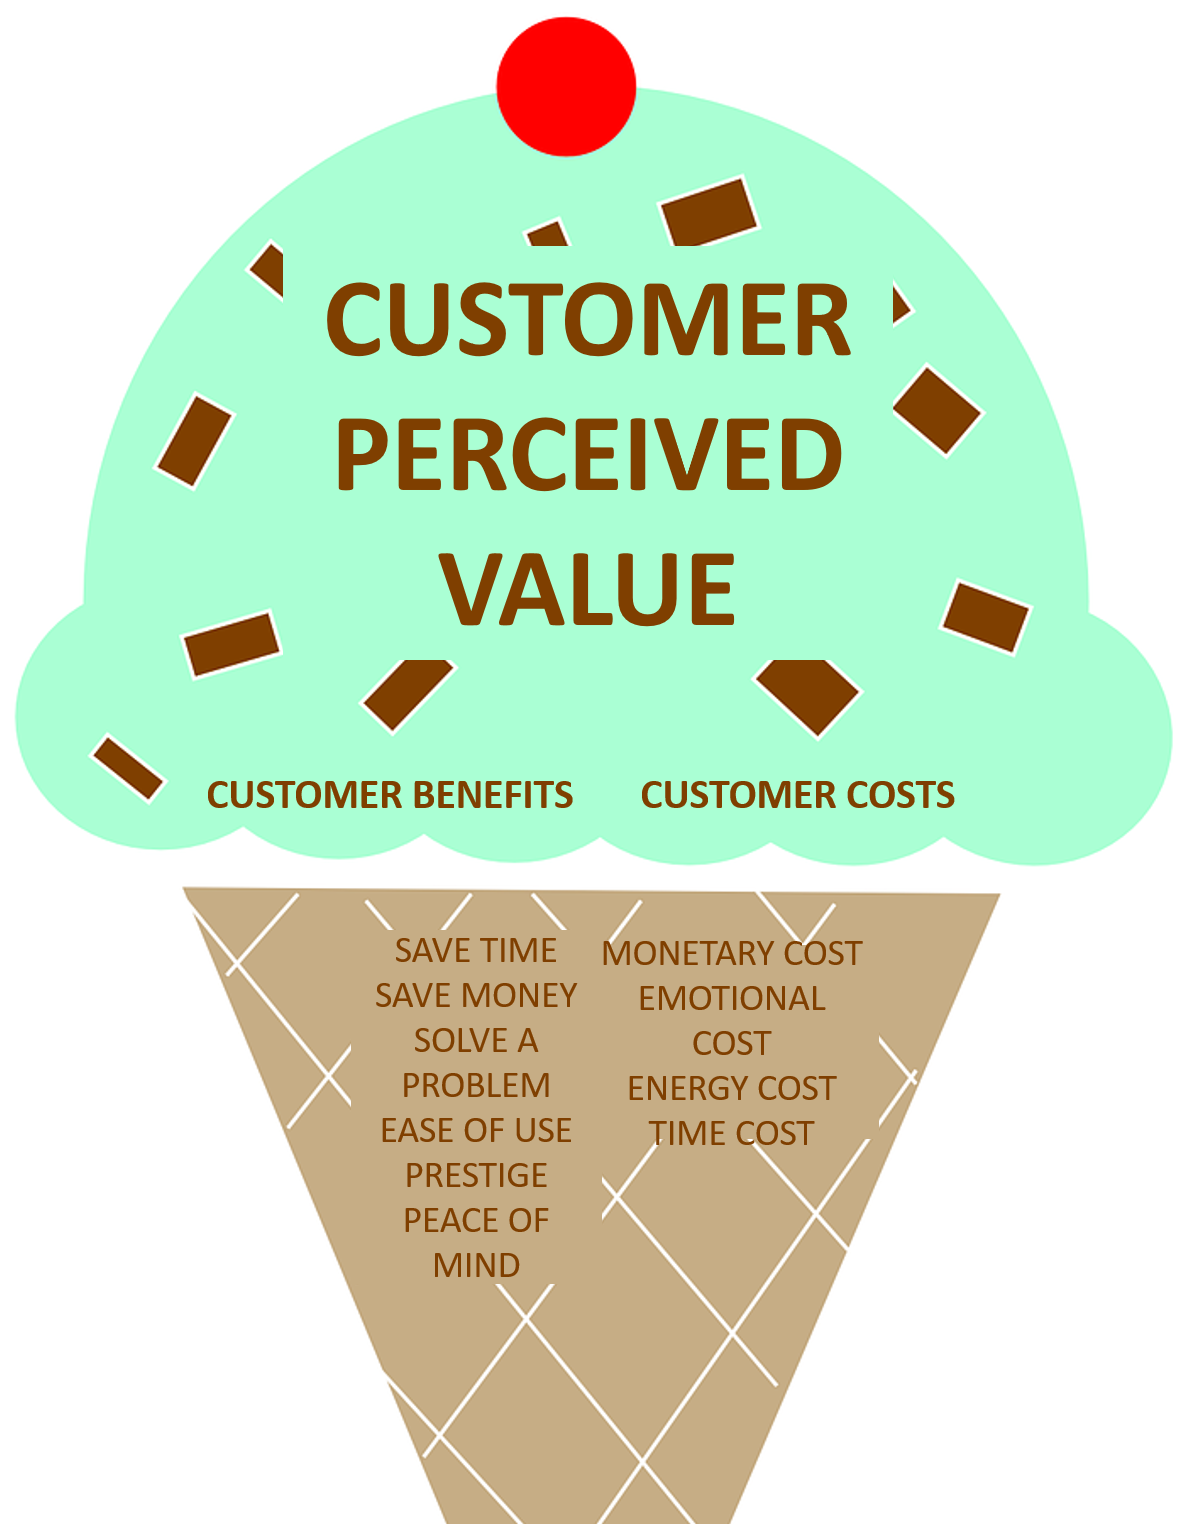 Customer Benefits (save time, money, solve an issue, prestige, peace) versus Customer Costs (money, emotional, energy, time)